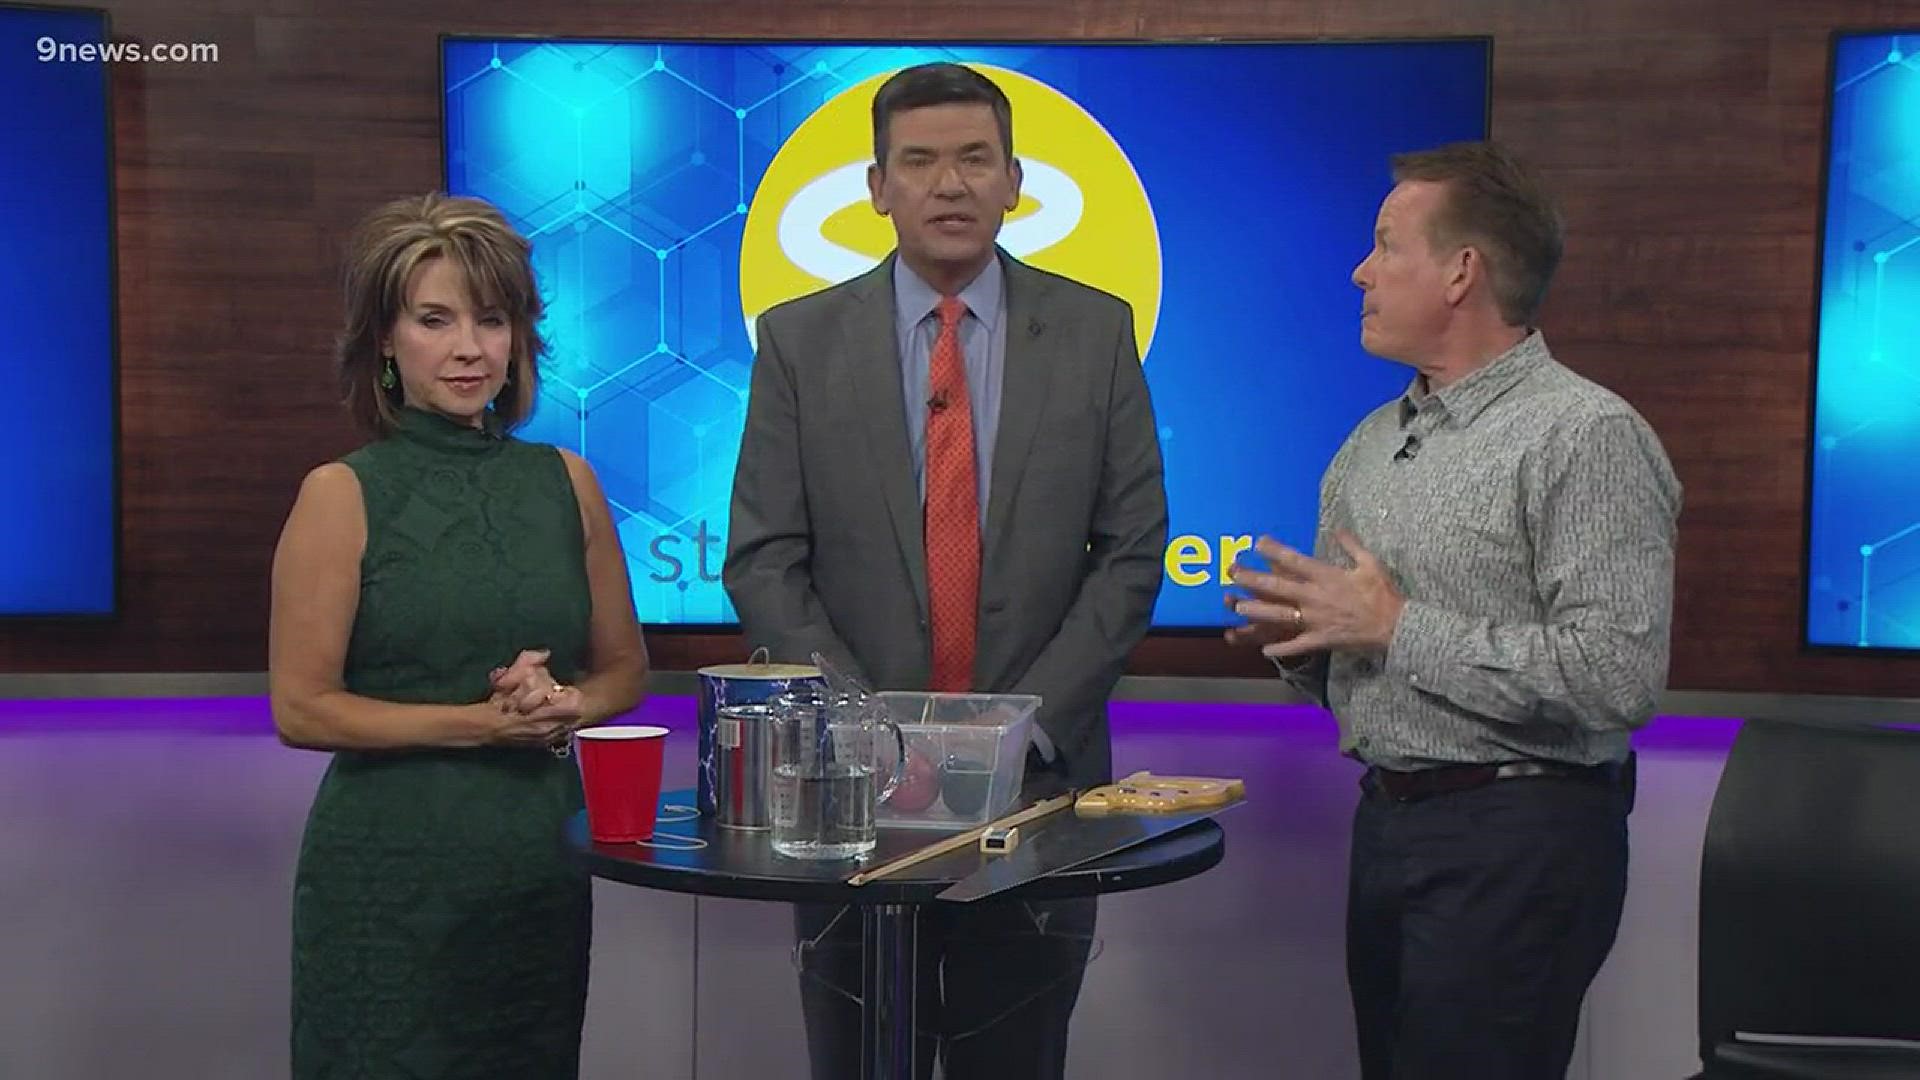 What would Halloween be without the sounds of a spooky howl, the crash of thunder or an alien monster? Our science guy, Steve Spangler, is back from the hardware store with all of the stuff you'll need to make this Halloween the best one ever.